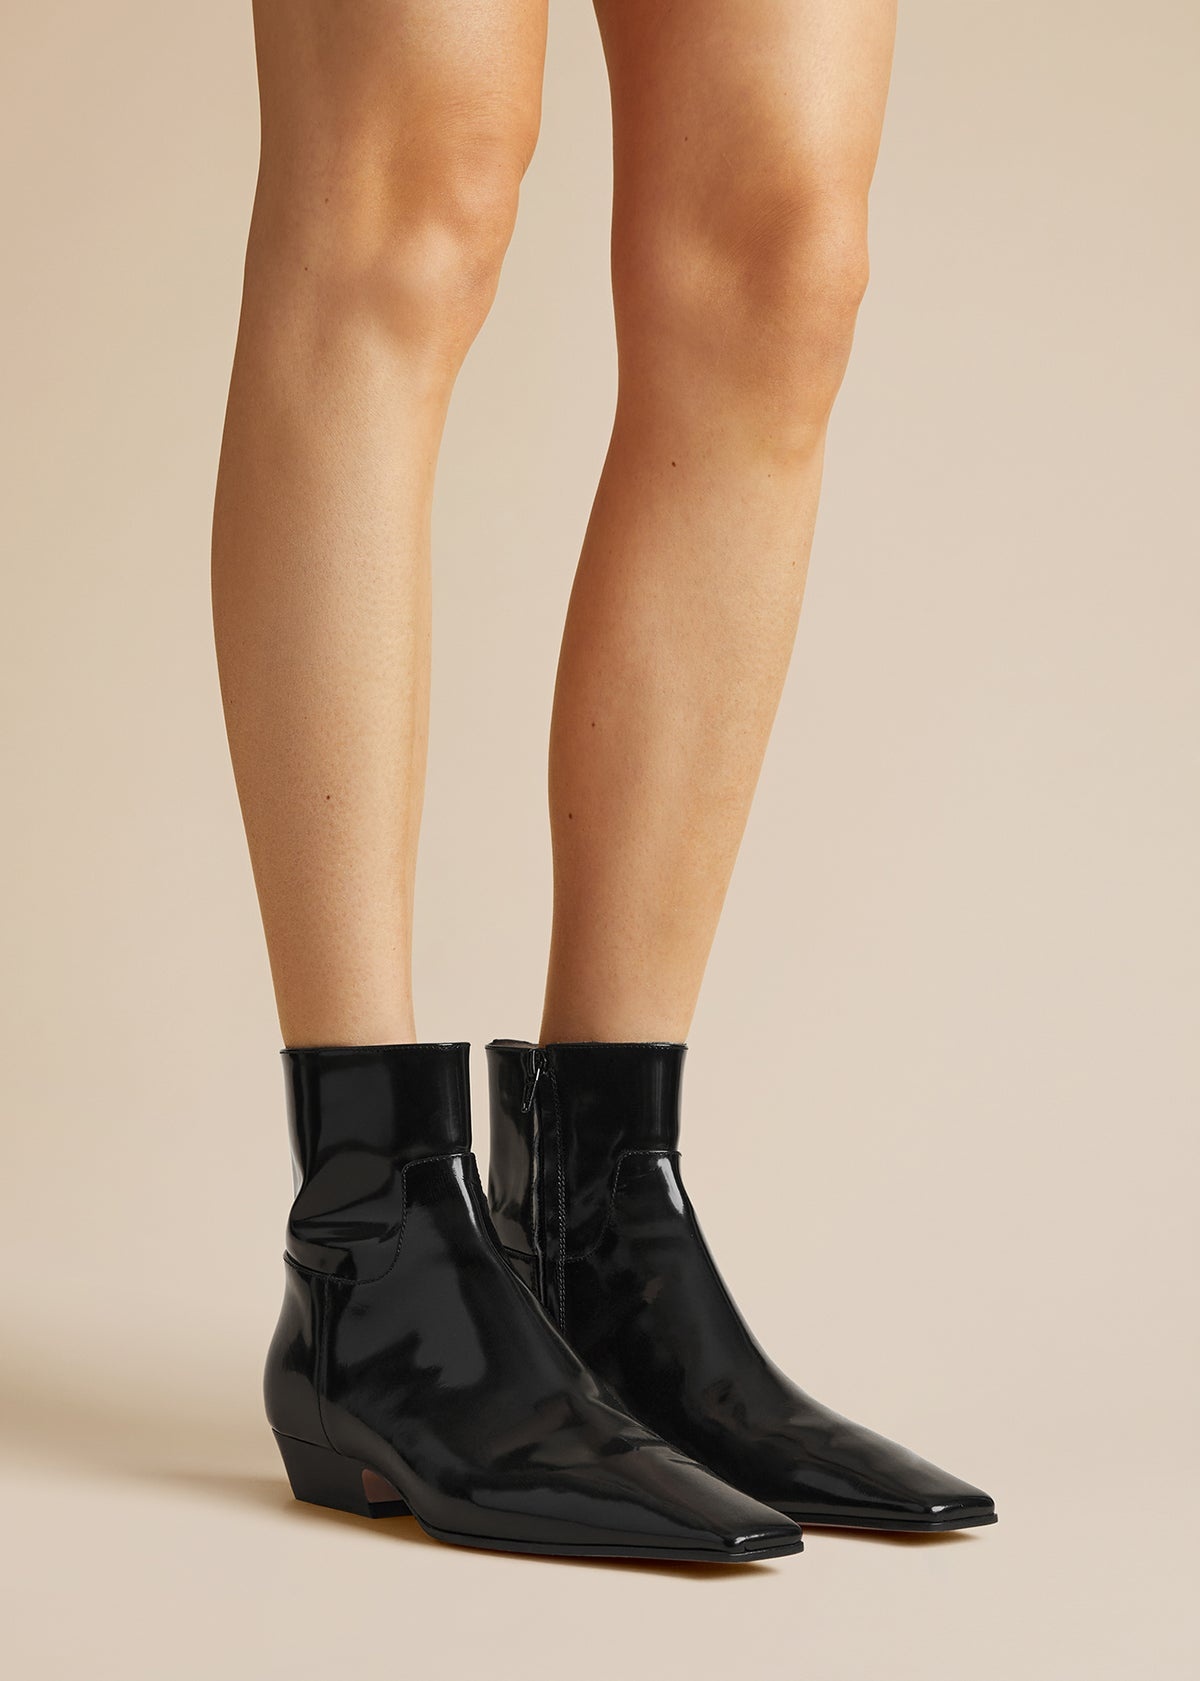 The Marfa Ankle Boot in Black Brushed Leather - 4